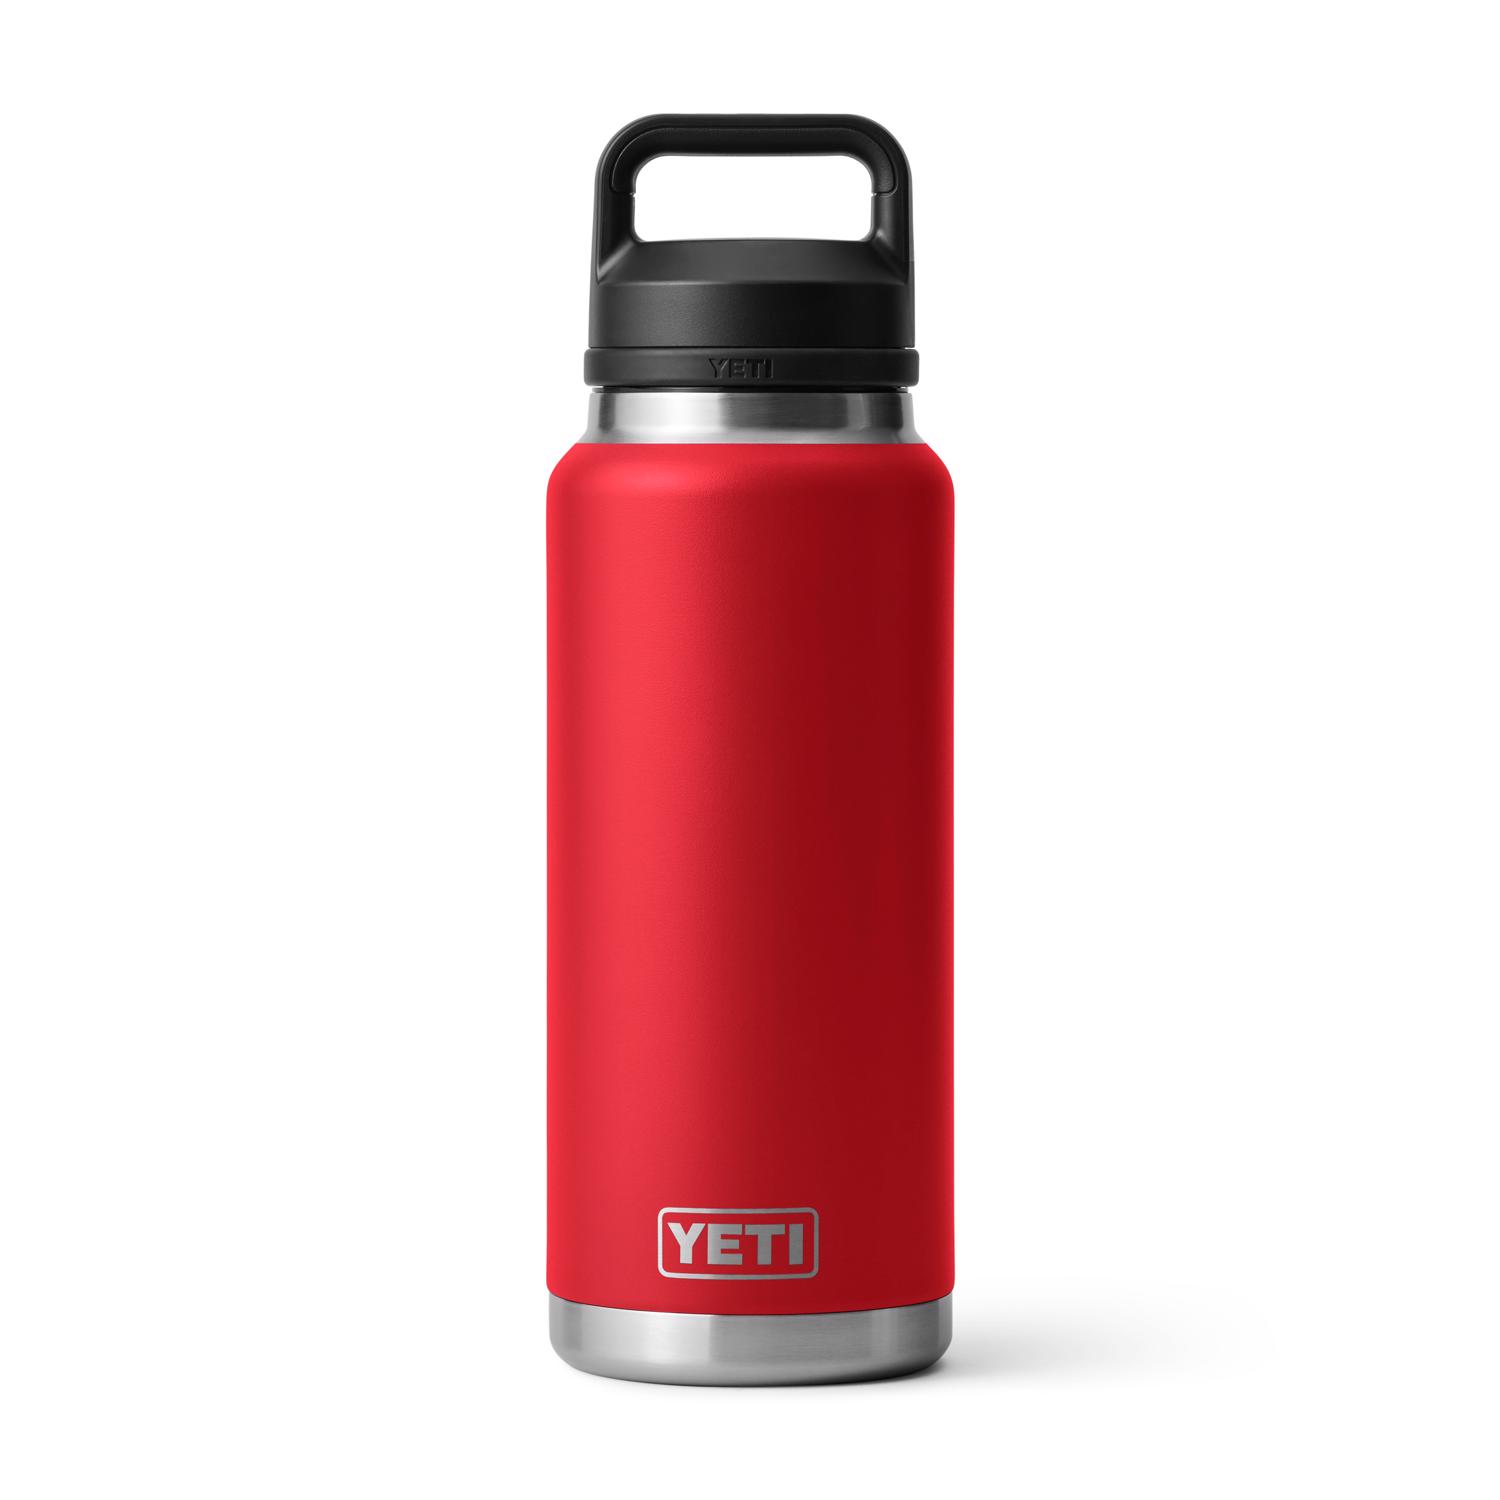 Photos - Other Accessories Yeti Rambler 36 oz Rescue Red BPA Free Bottle with Chug Cap 21071503925 